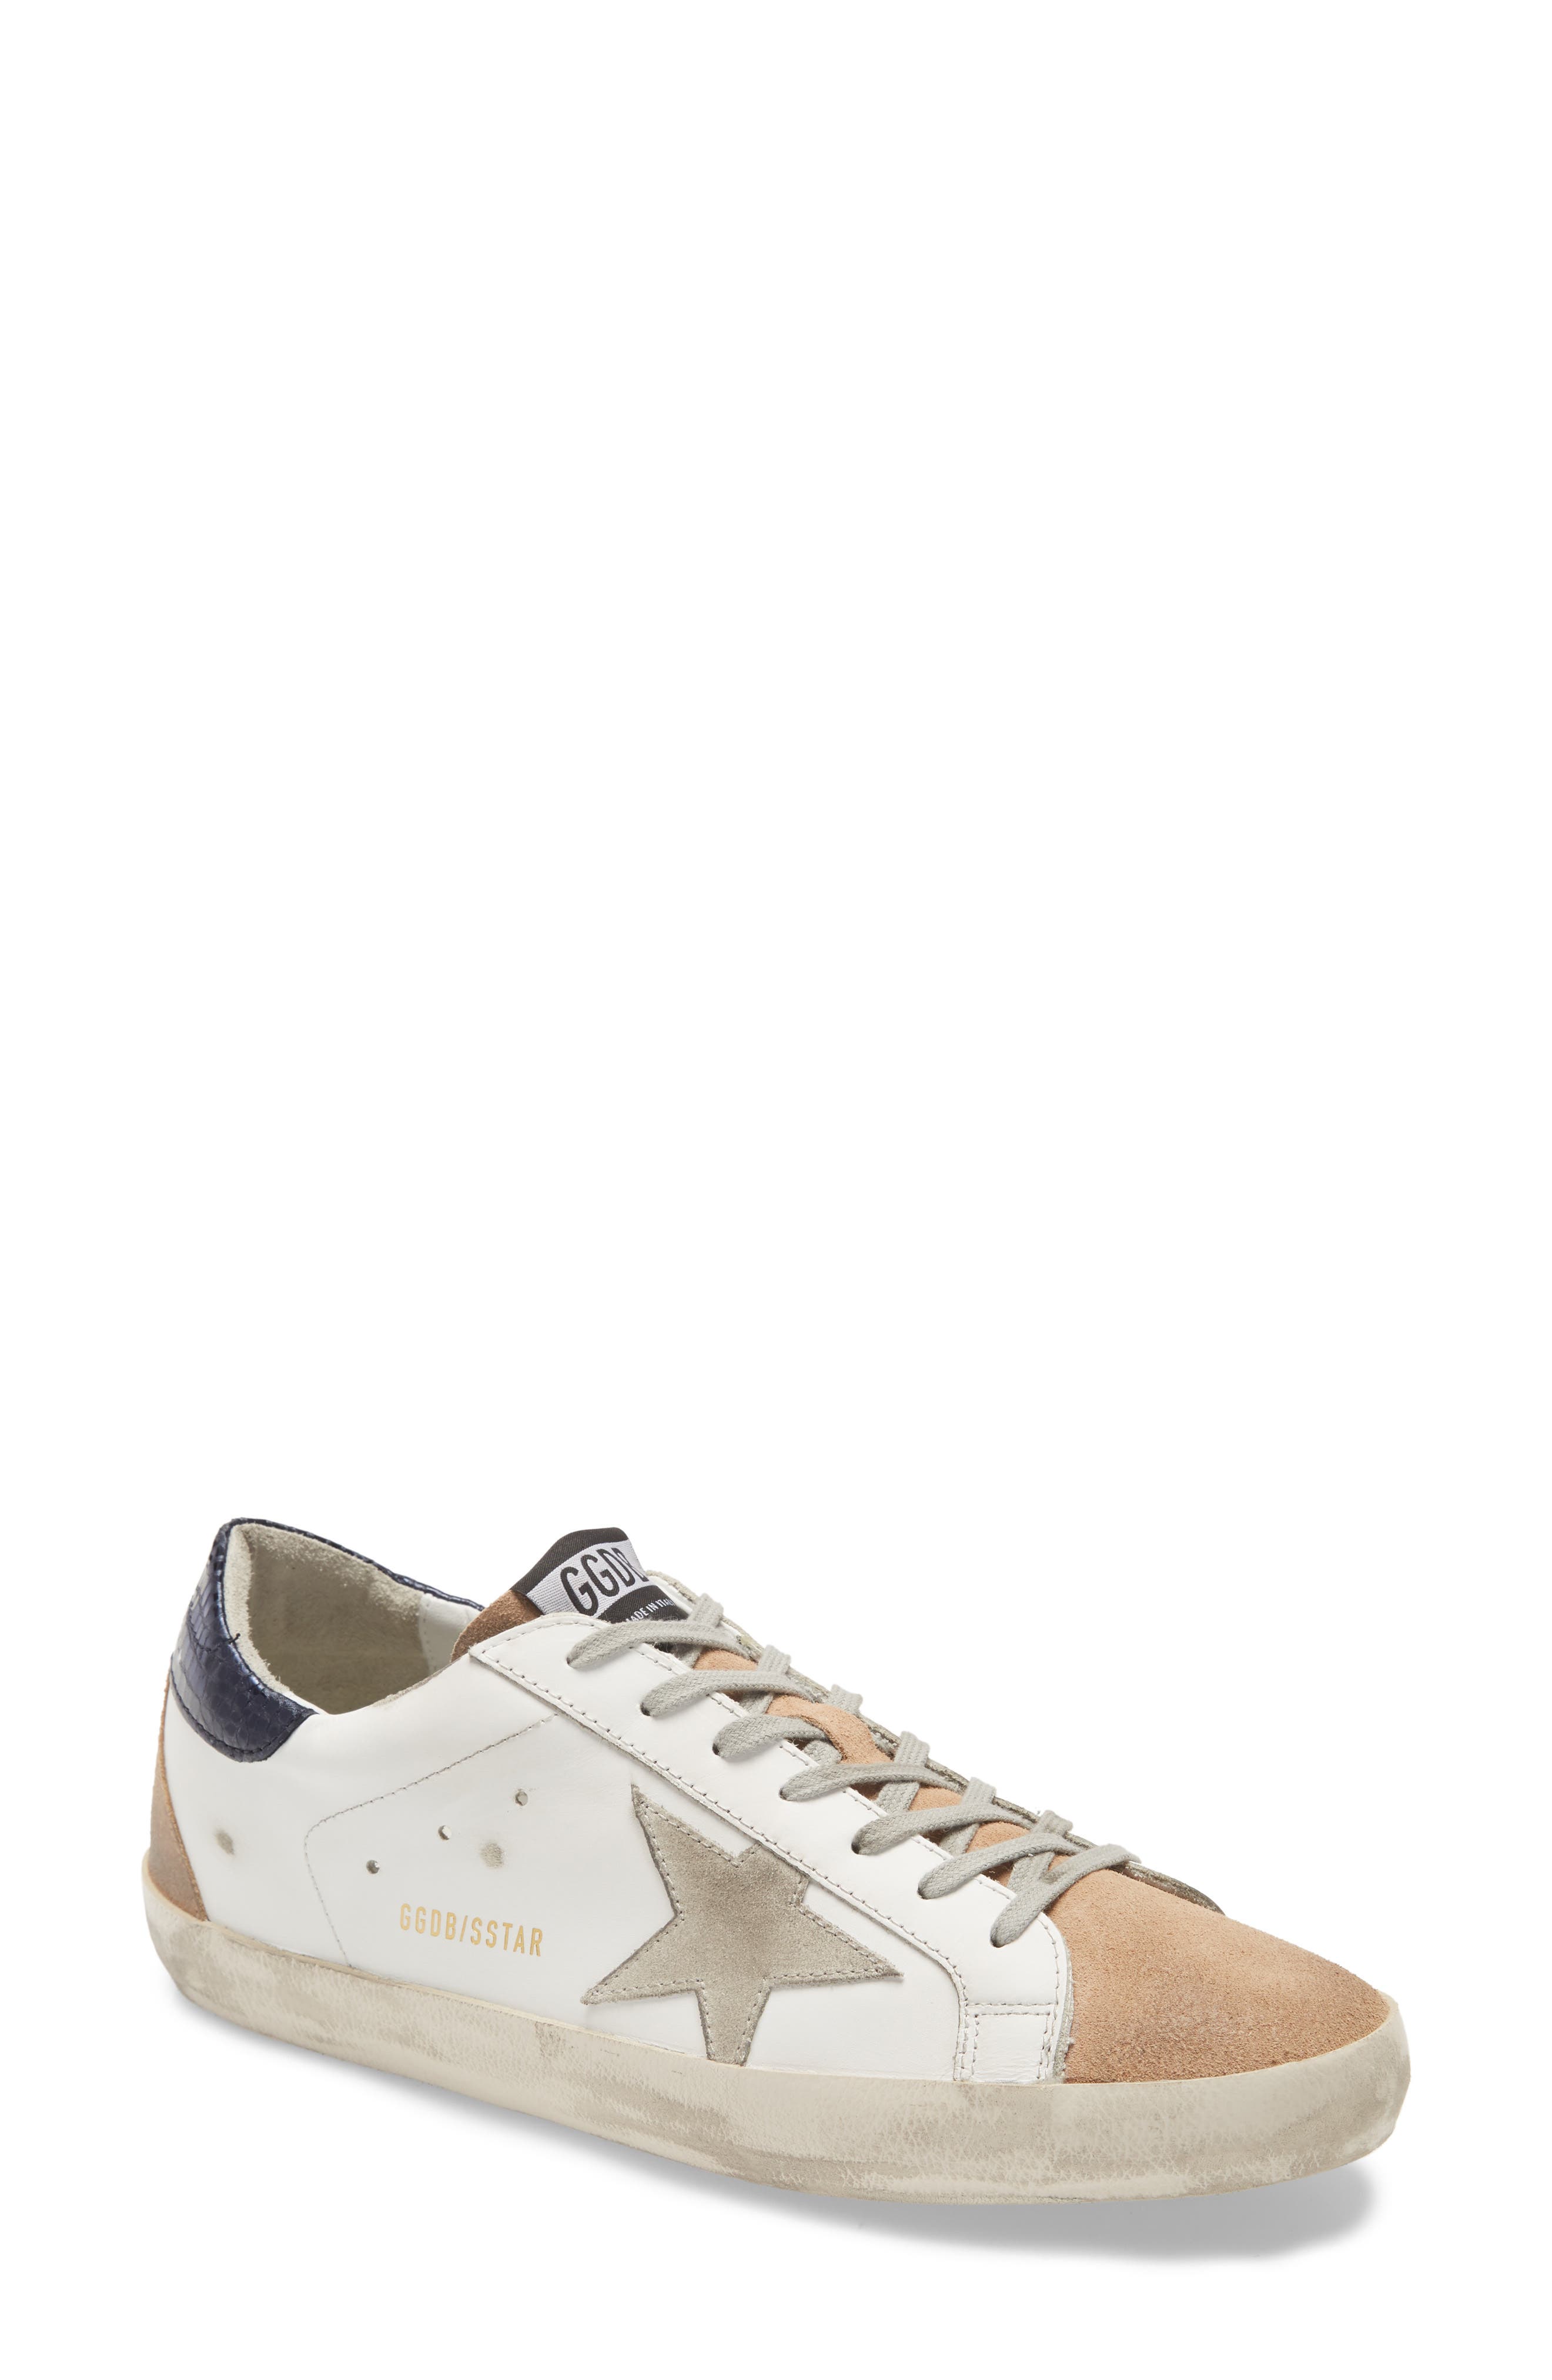 Golden Goose Super Star Sneaker in White Leather/Nude Suede/Ice at Nordstrom, Size 7Us